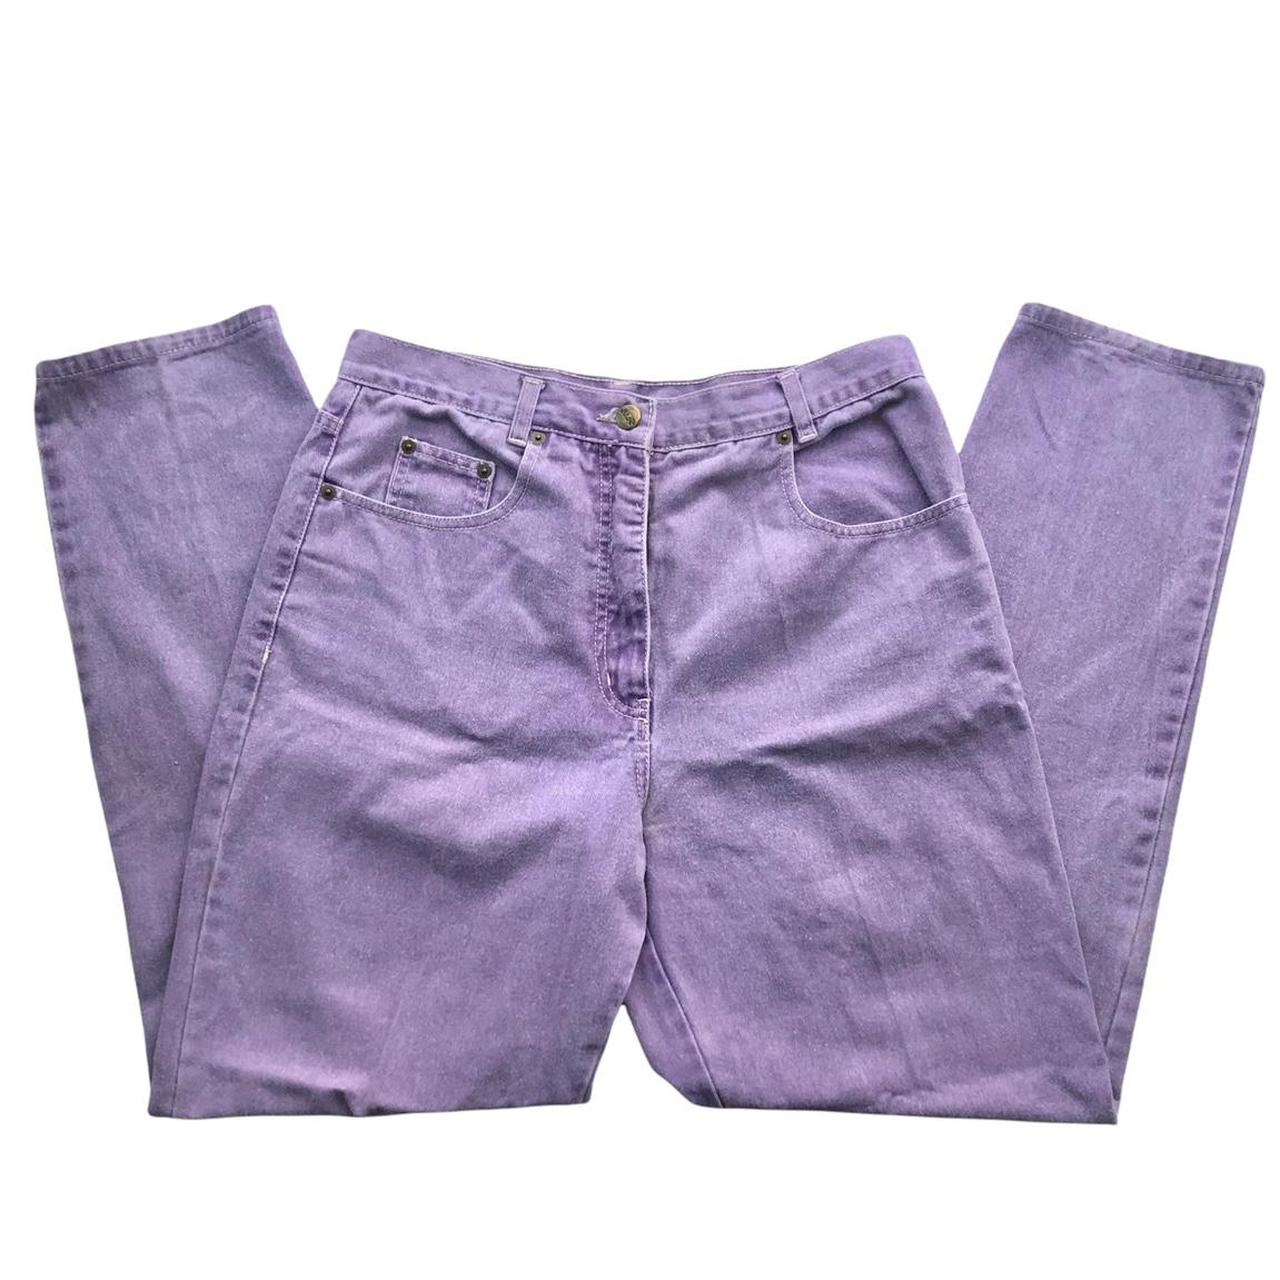 Product Image 1 - Vintage jeans in purple lilac,